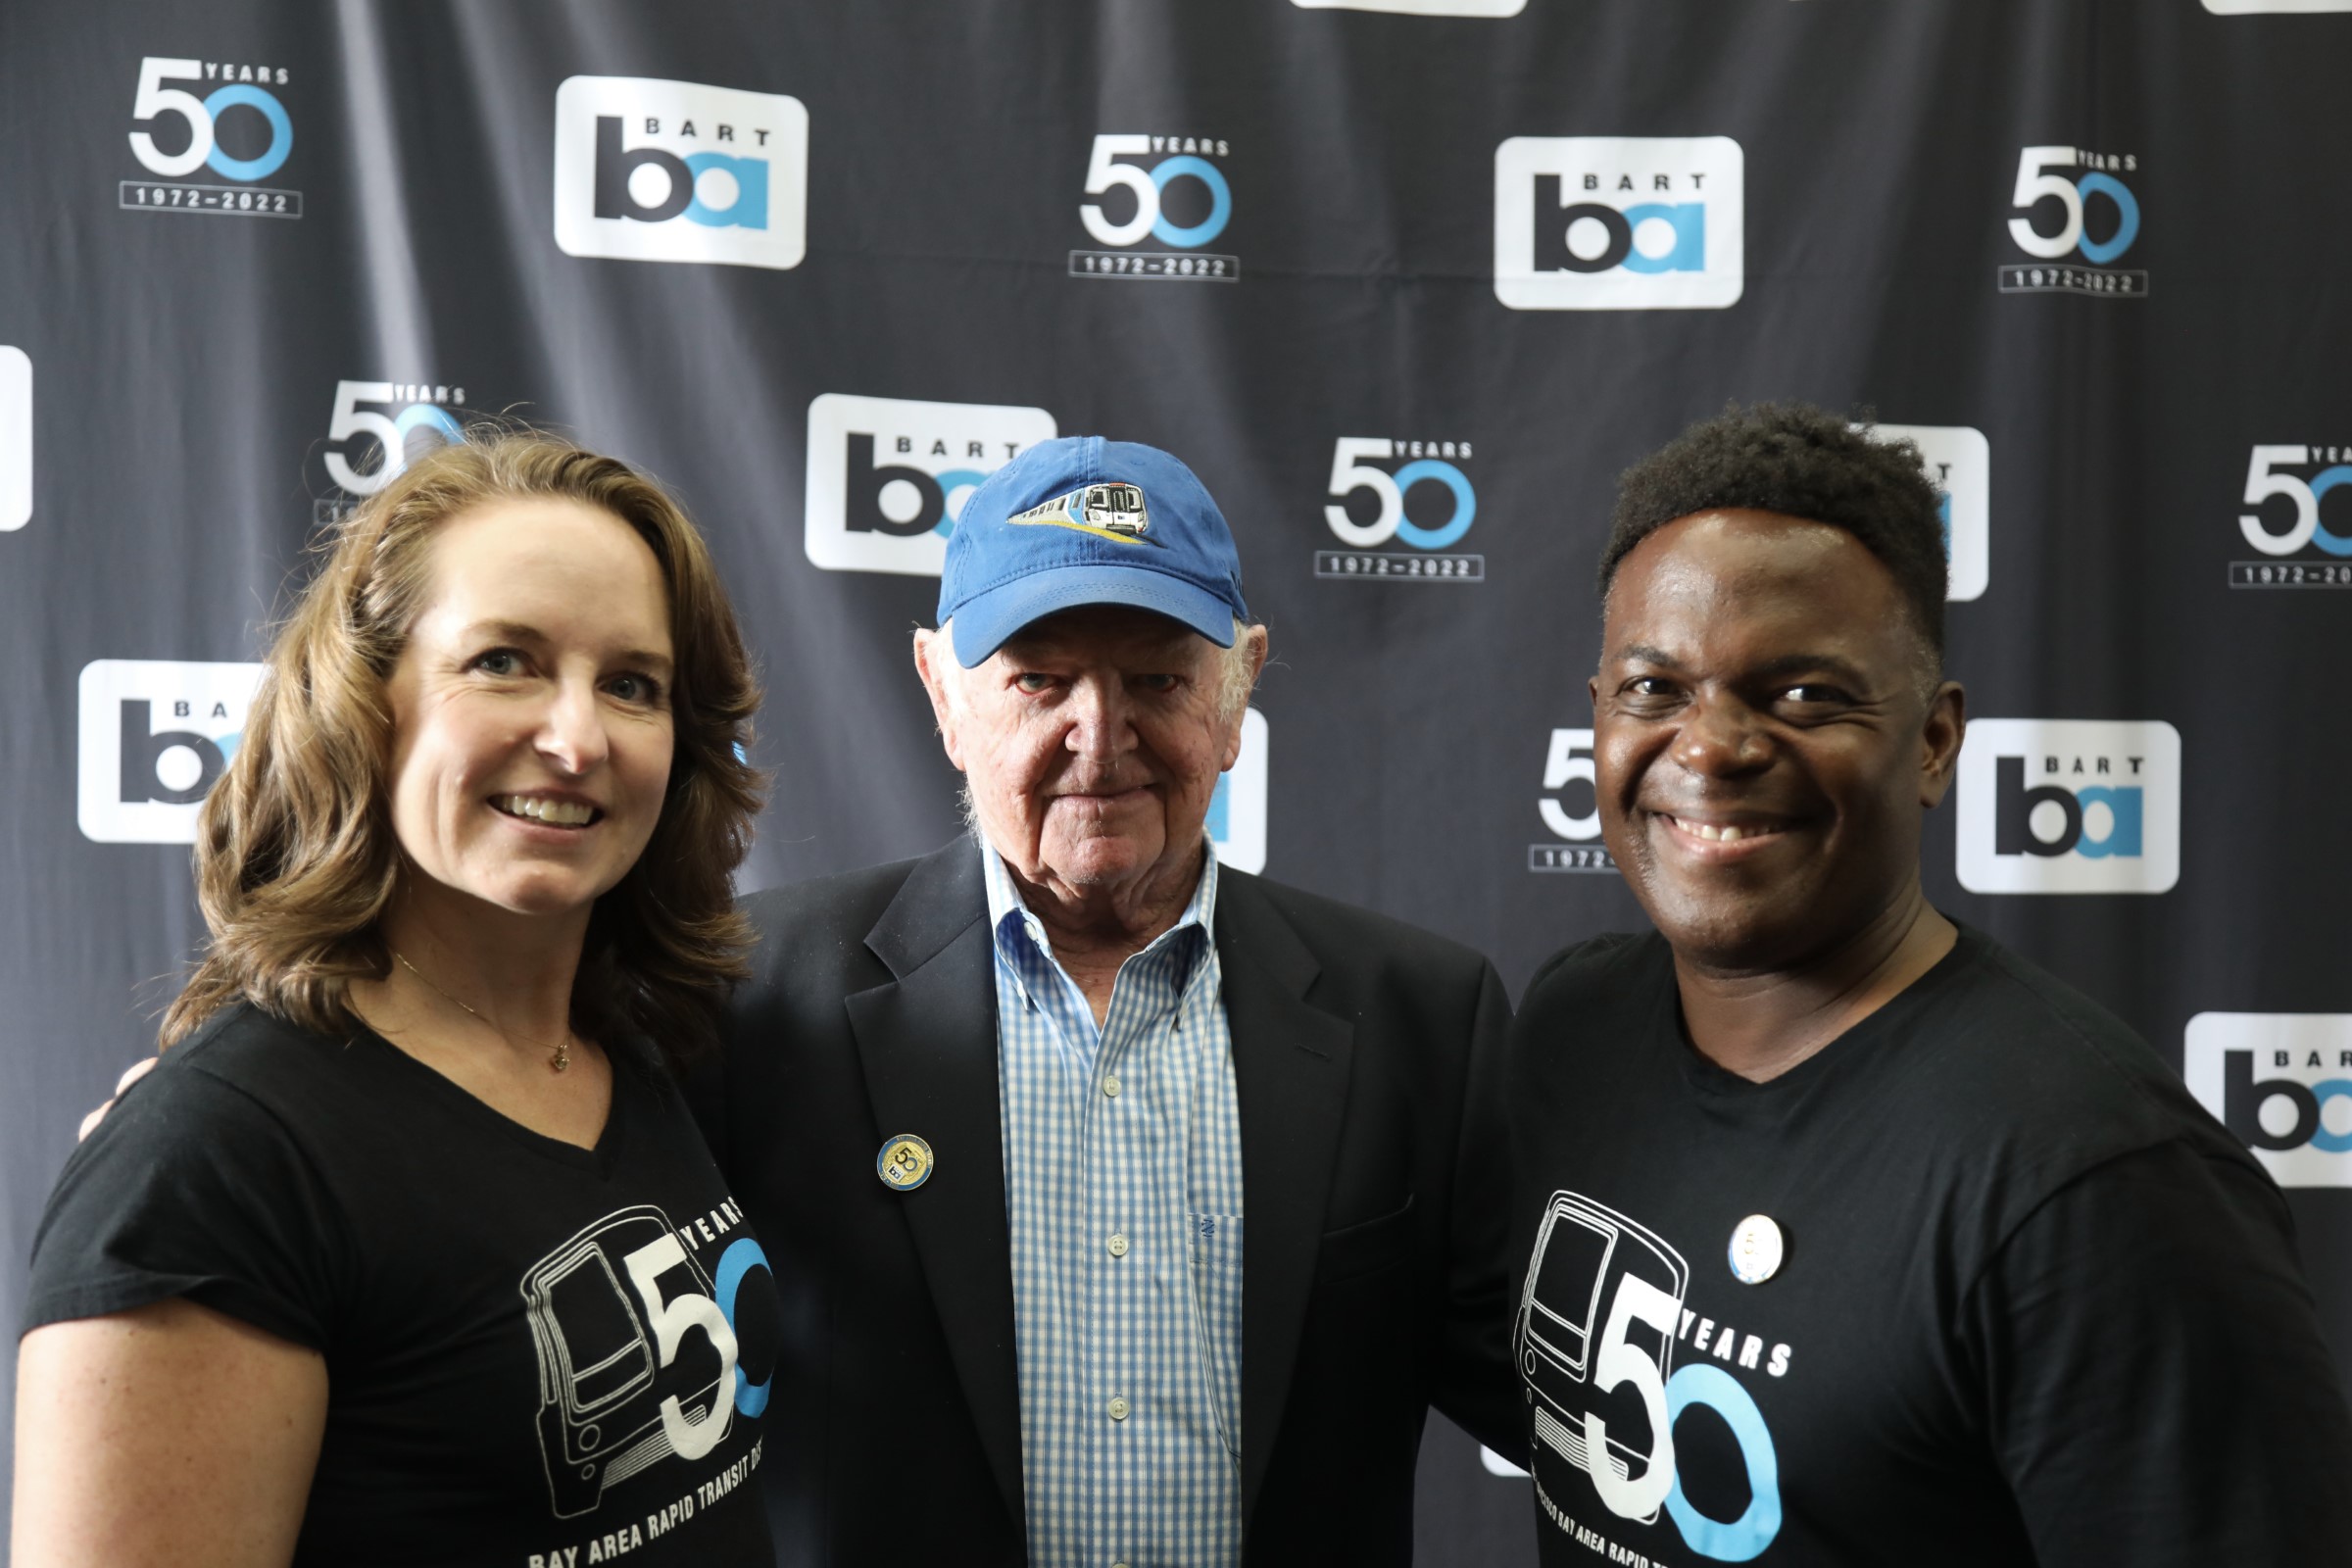 BART Chief Communications Officer Alicia Trost (left), former BART Director of Public Affairs Mike Healy (center), and BART Strategic Programs Manager Linton Johnson (right).